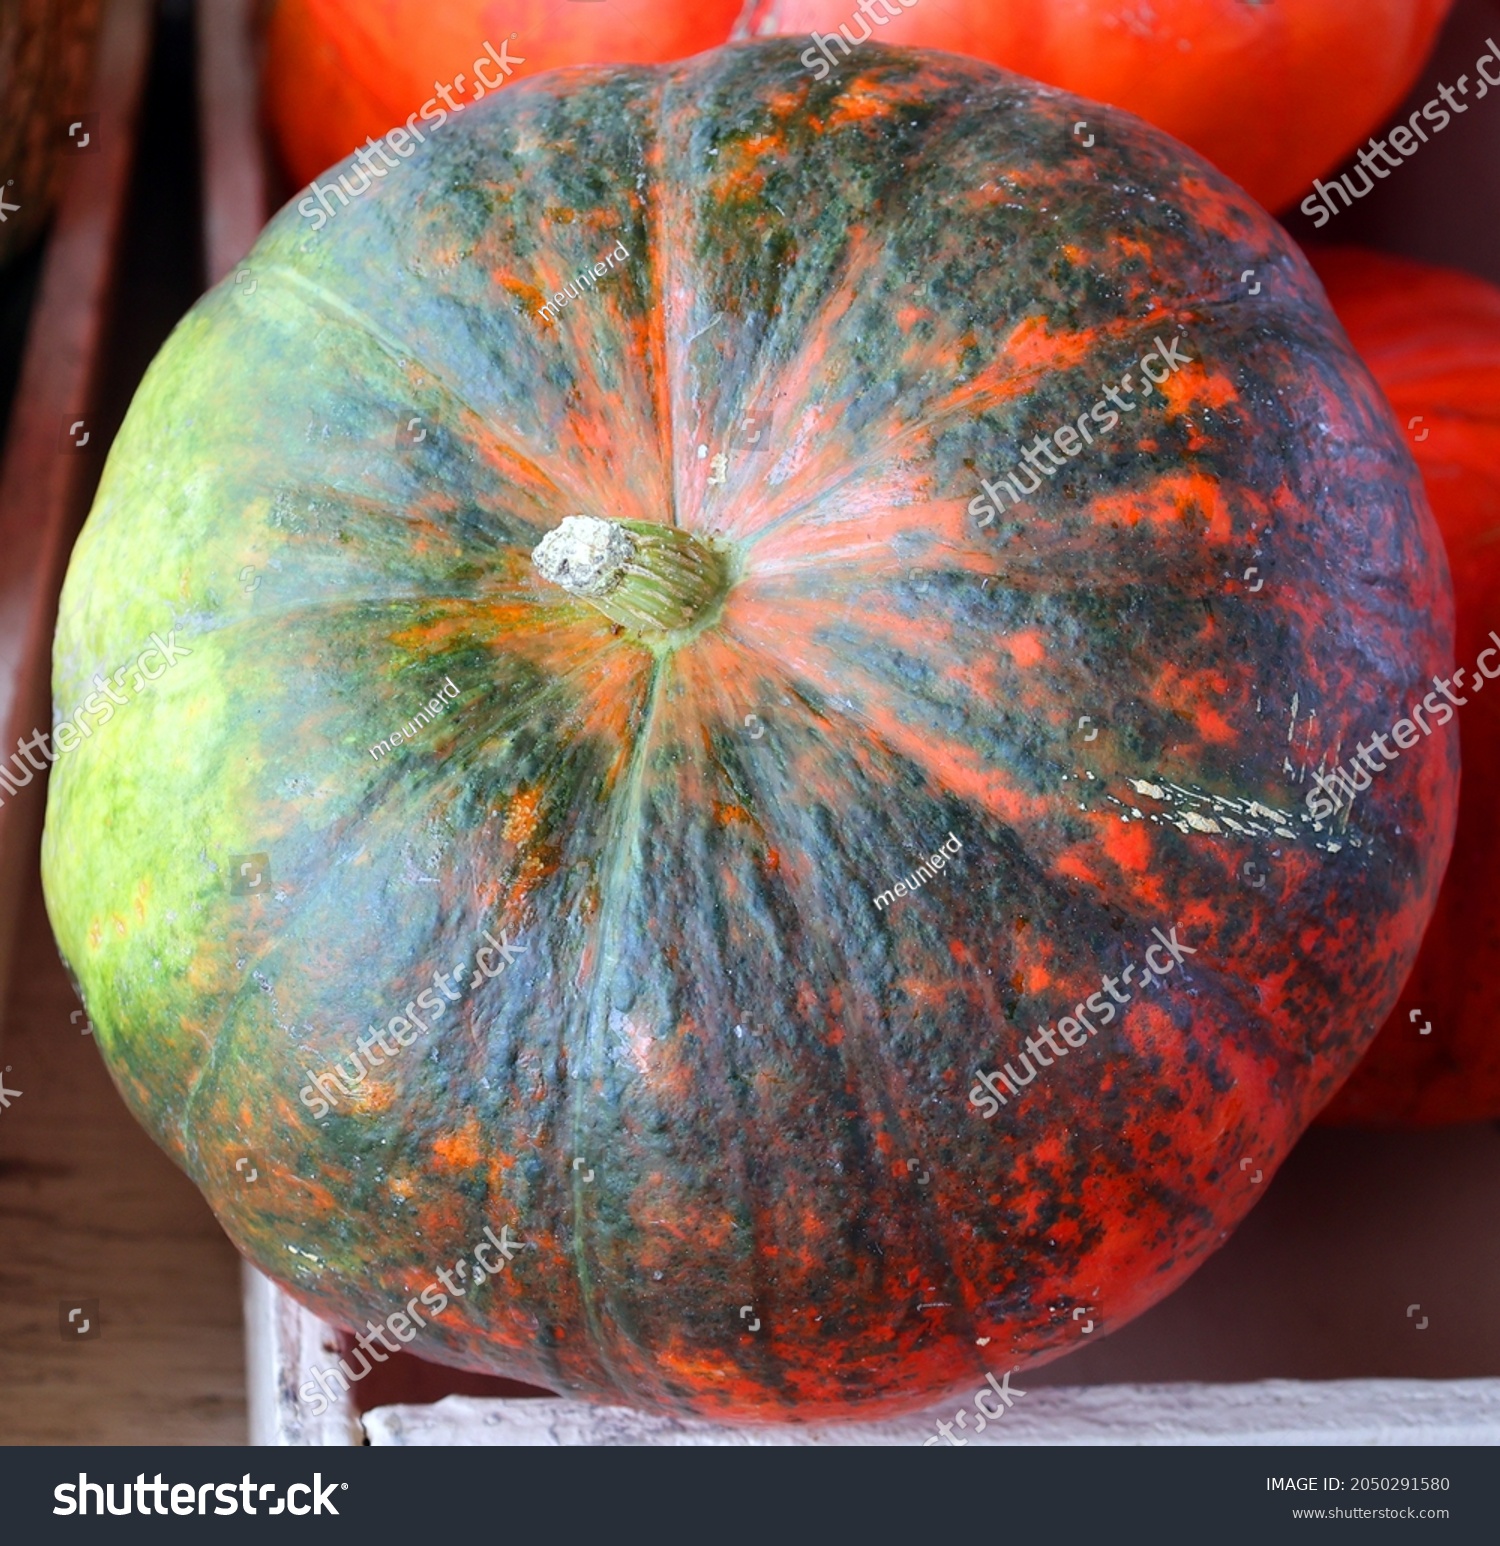 Cinderella pumpkins (Rouge, Rouge Vif d'Estampes) have become increasingly popular because of their shape, bright color, and enchanting name #2050291580